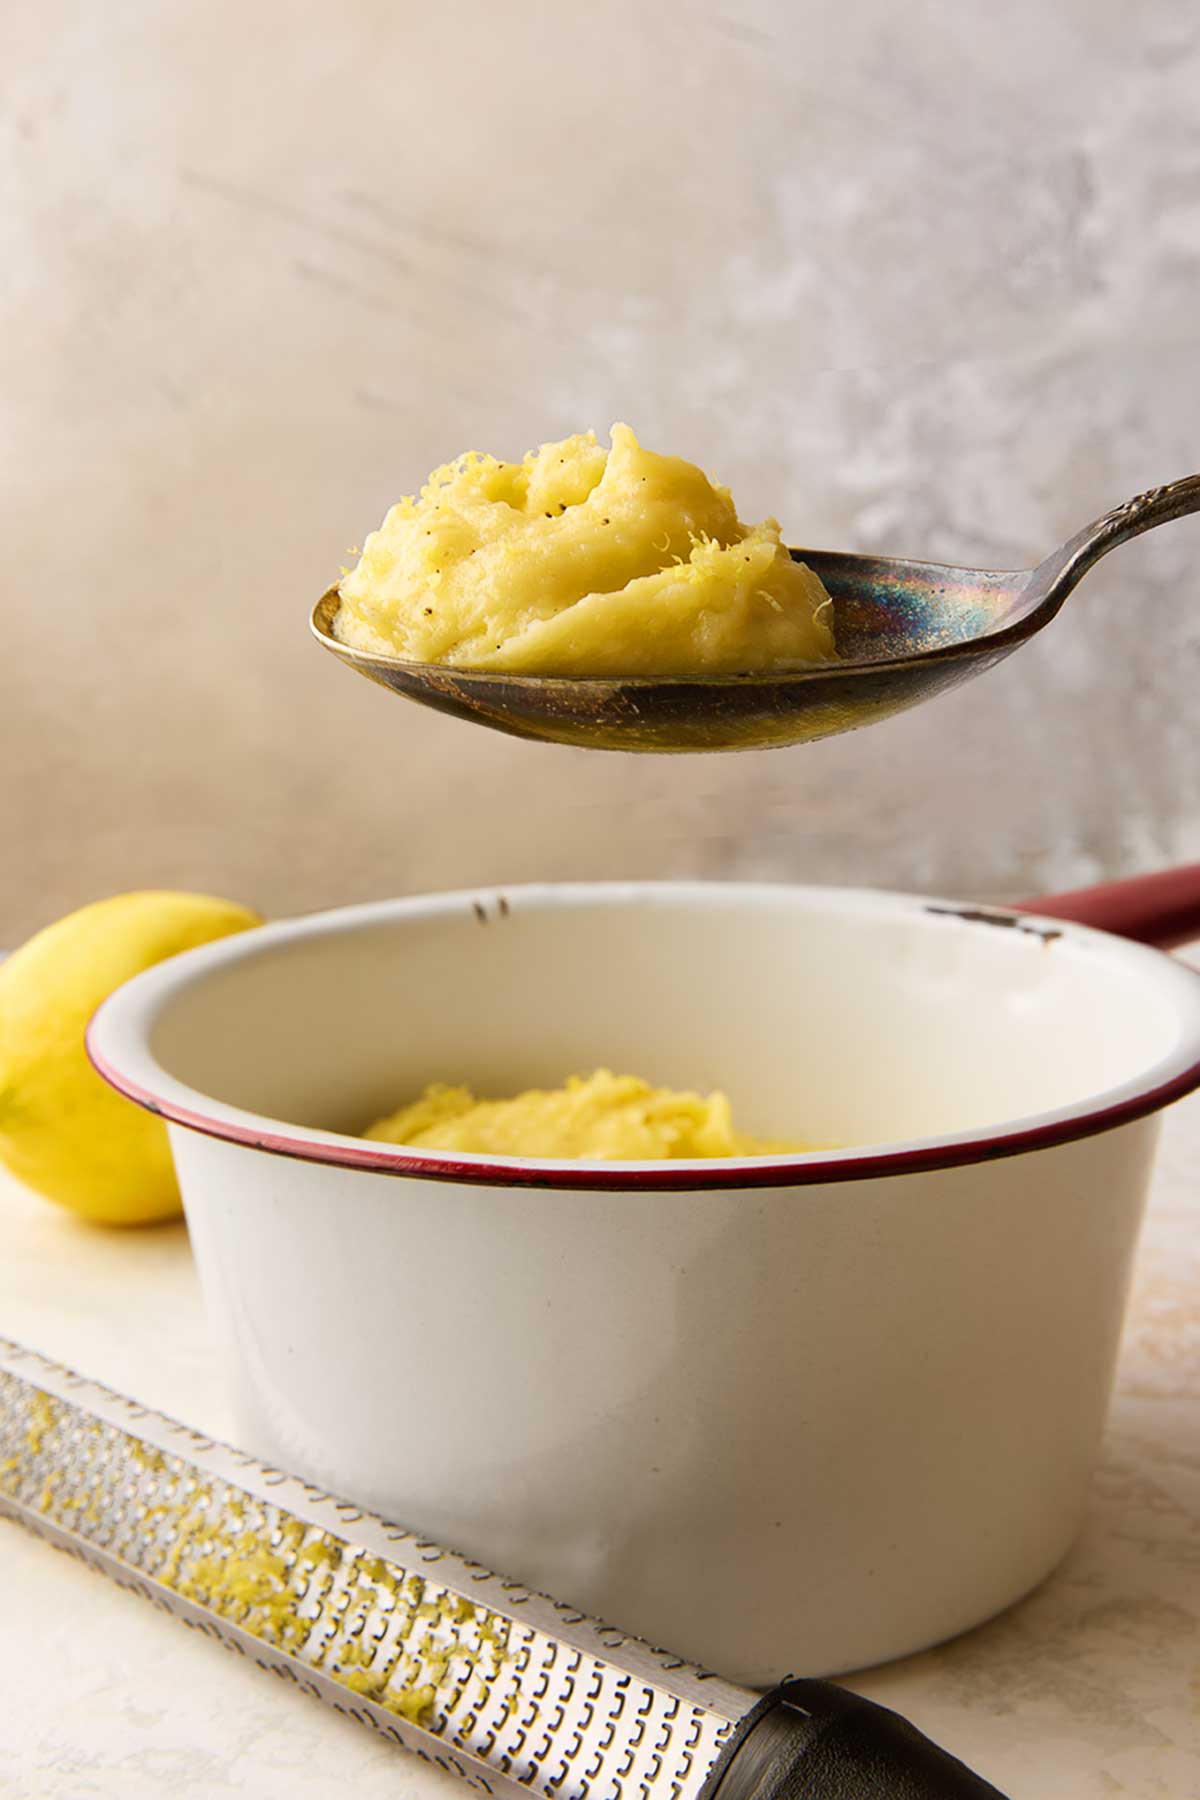 A spoonful of mashed potatoes with lemon being held over a bowl of mashed potatoes.